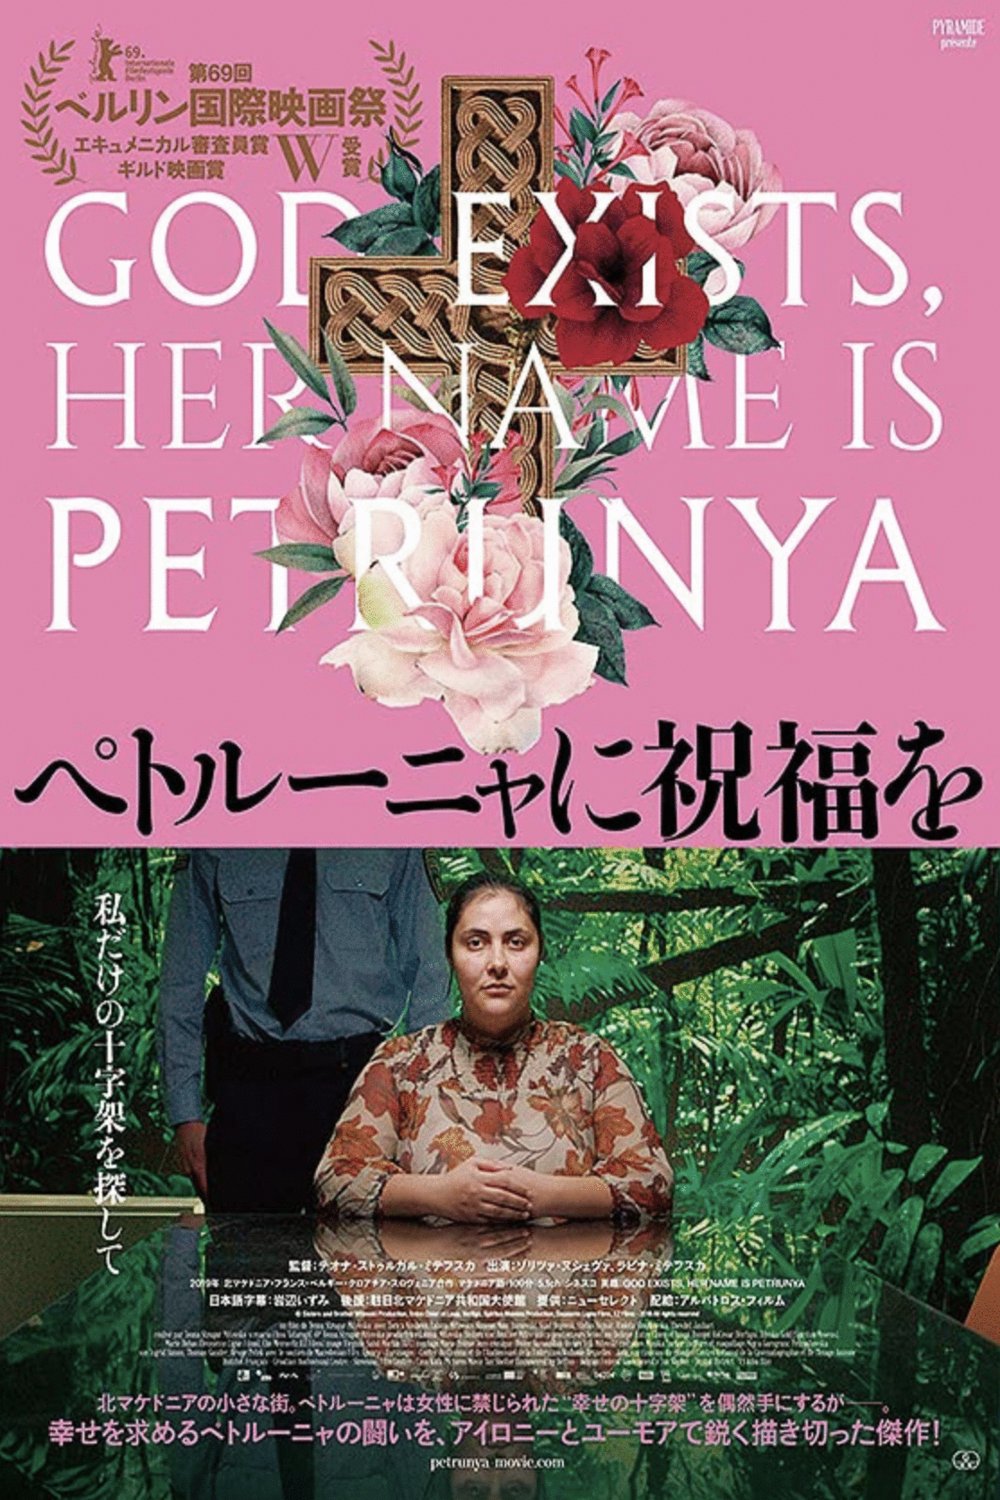 Poster of the movie God Exists, Her Name Is Petrunya